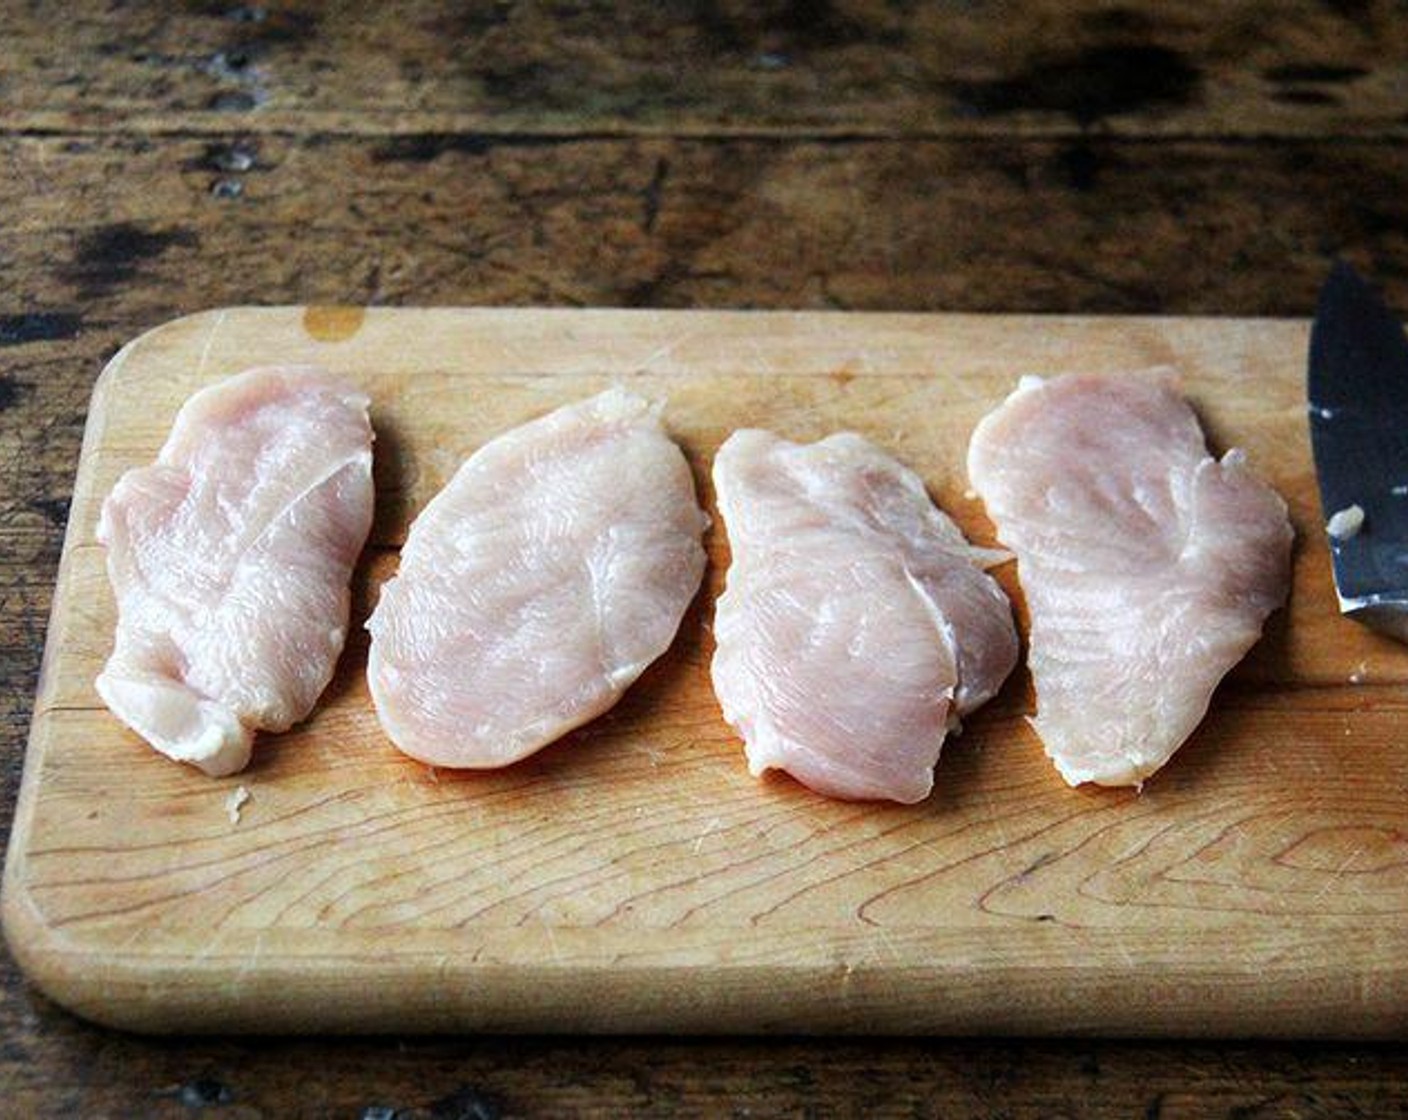 step 3 Meanwhile, prepare the Chicken Breasts (2): if the tenderloin is still intact, slice it off and set it aside. At this point, you can either pound the chicken breasts to a 1/2-inch thickness, or you could cut each breast in half crosswise, to create 4 thin pieces.